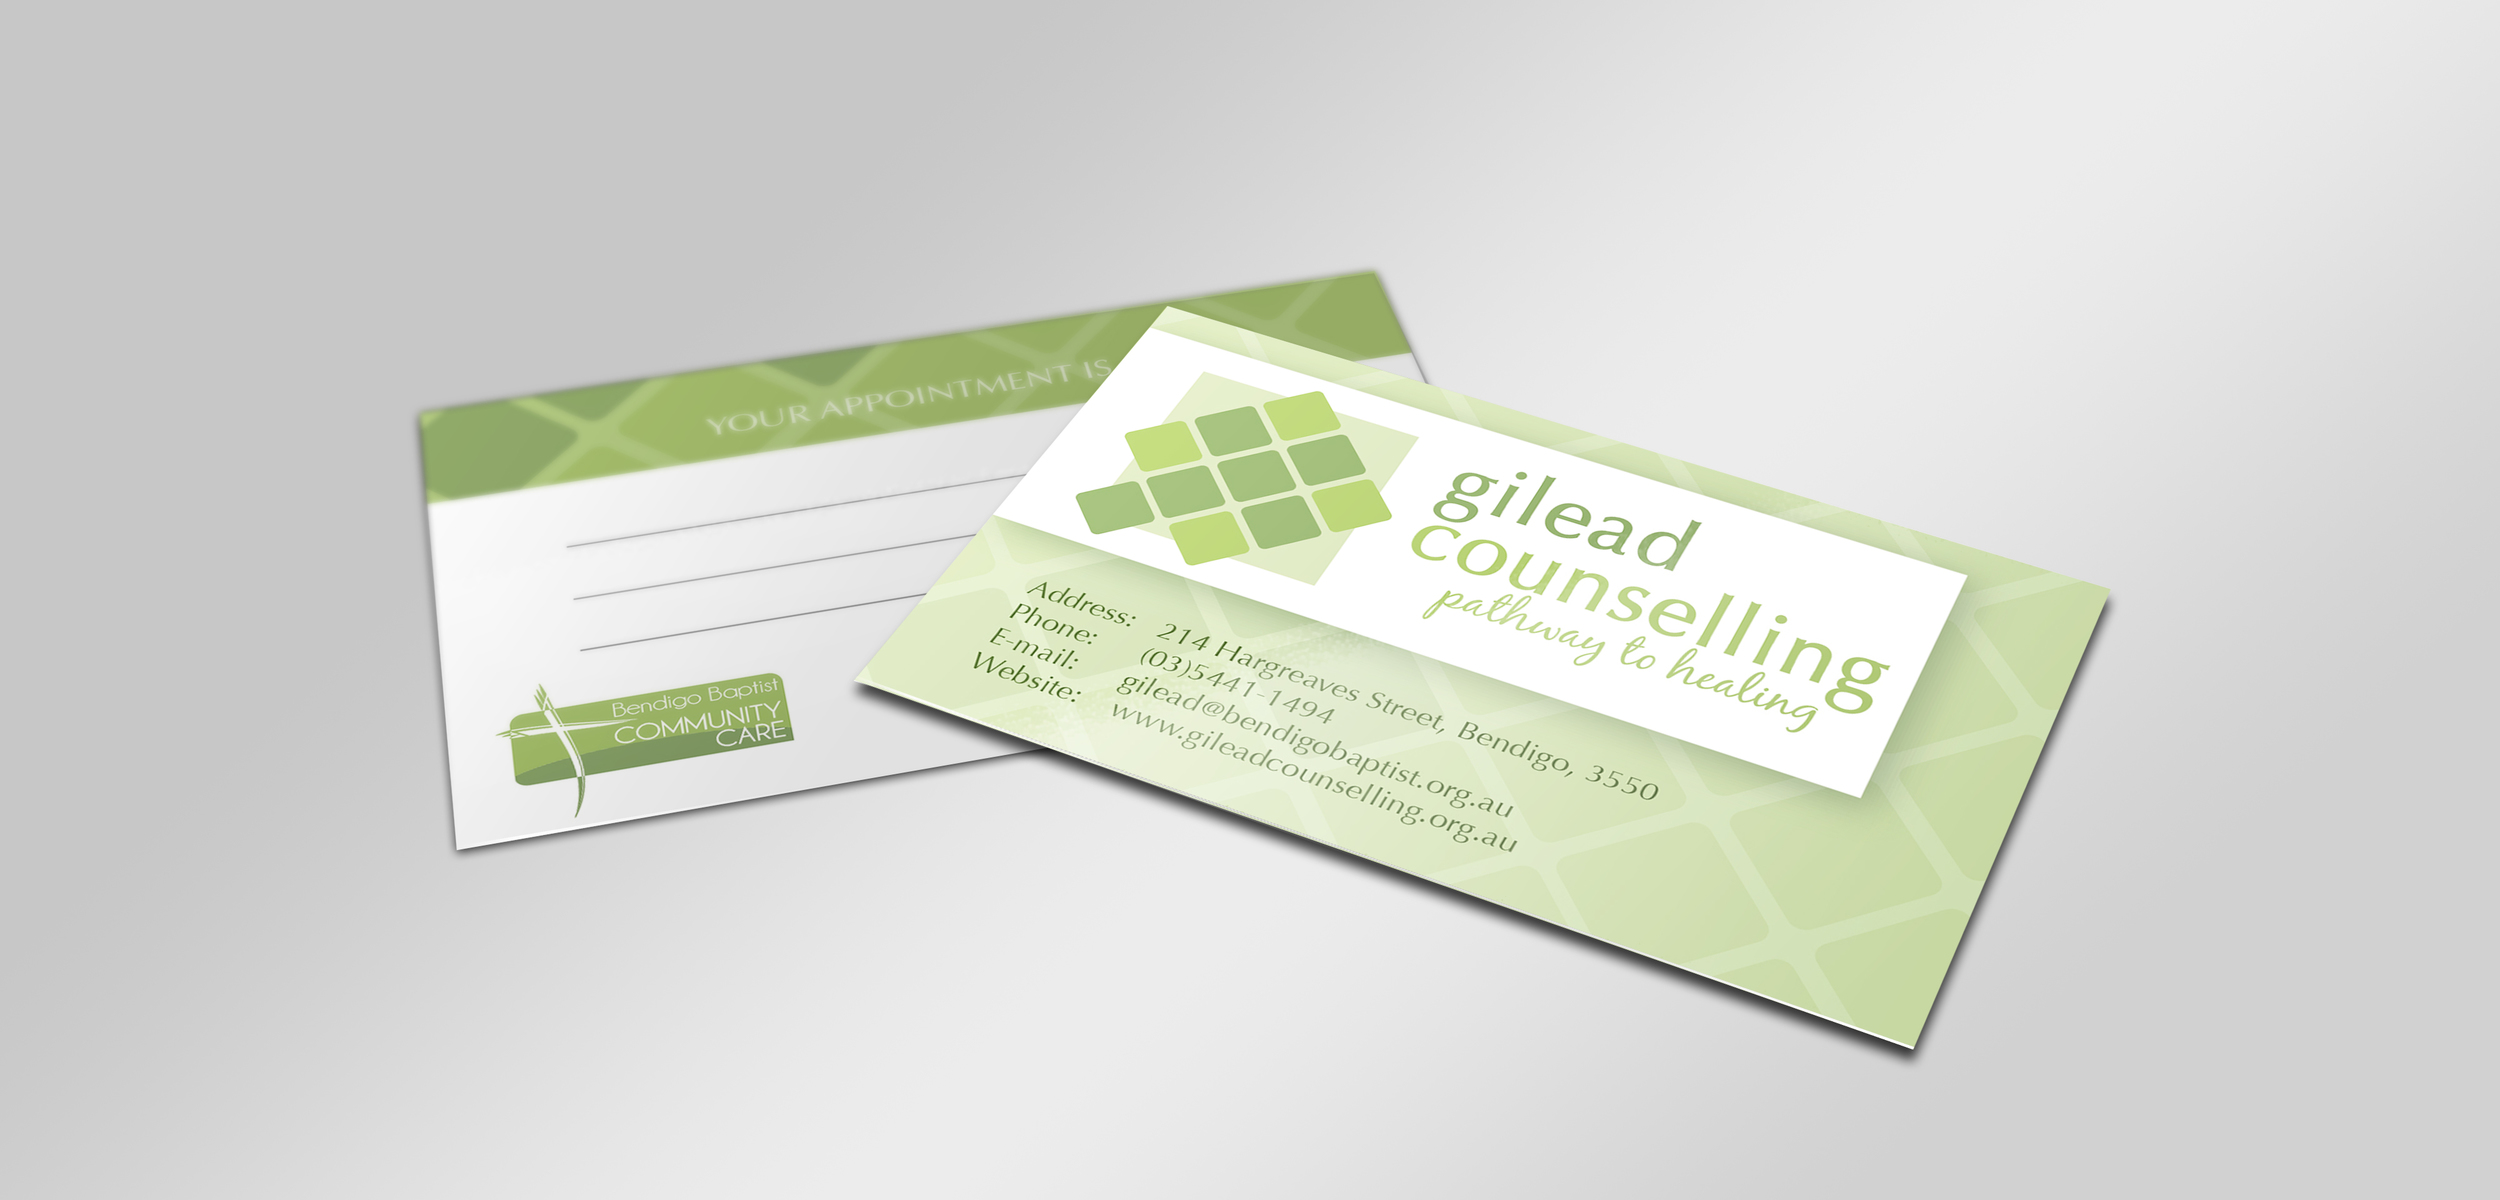  Logo and business card design for  Gilead Counselling.  